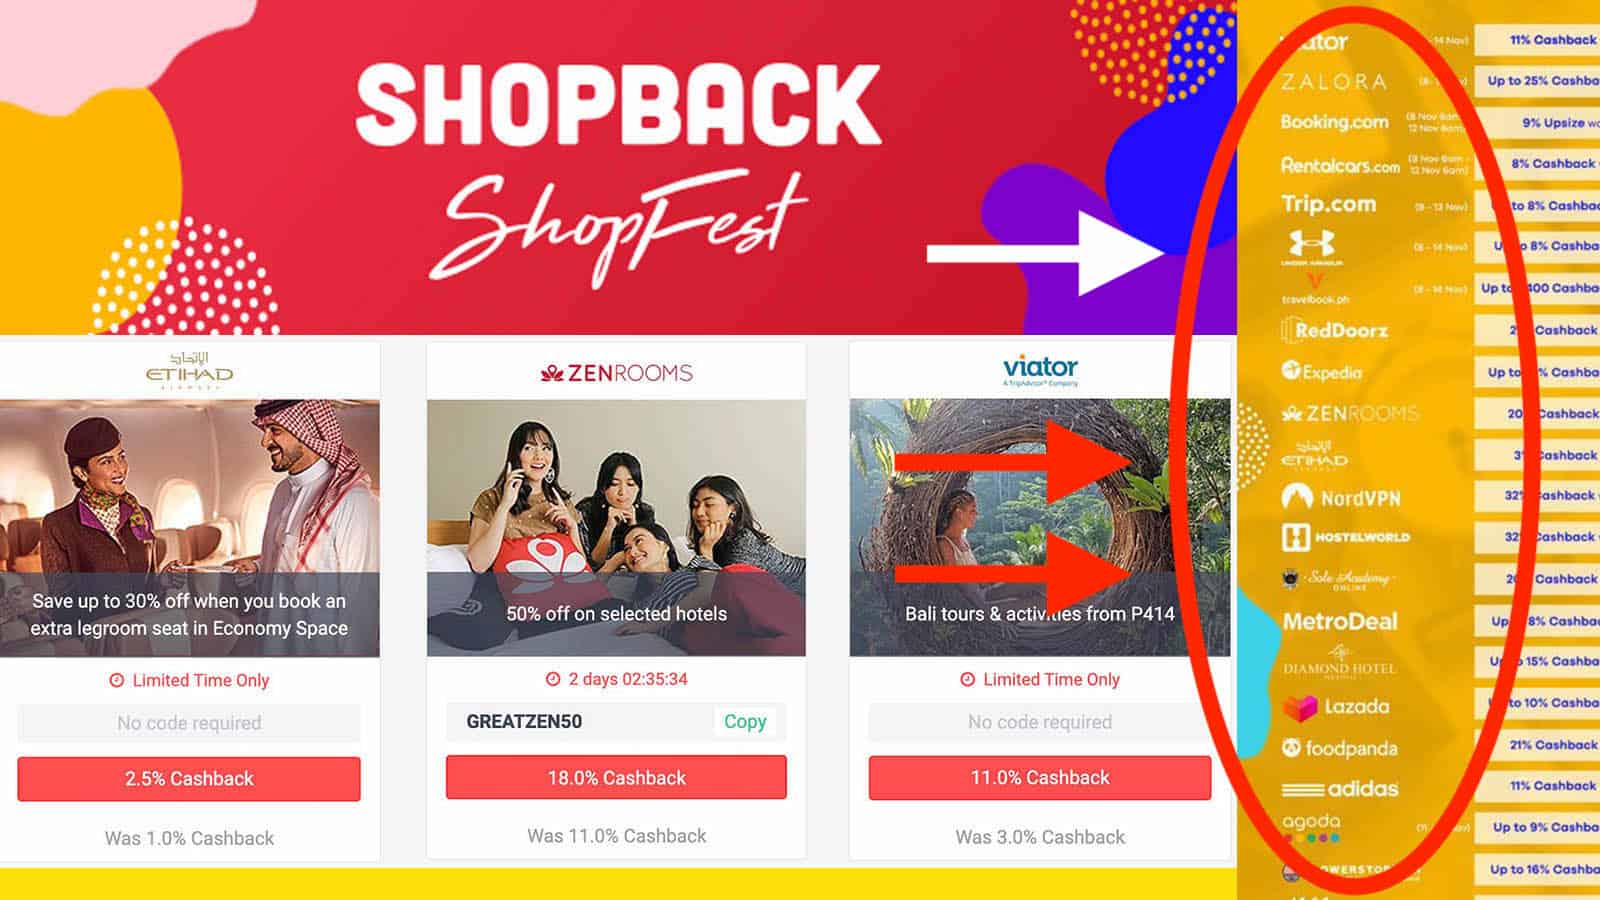 All the TRAVEL DEALS You can Get from the 11.11 ShopBack ShopFest